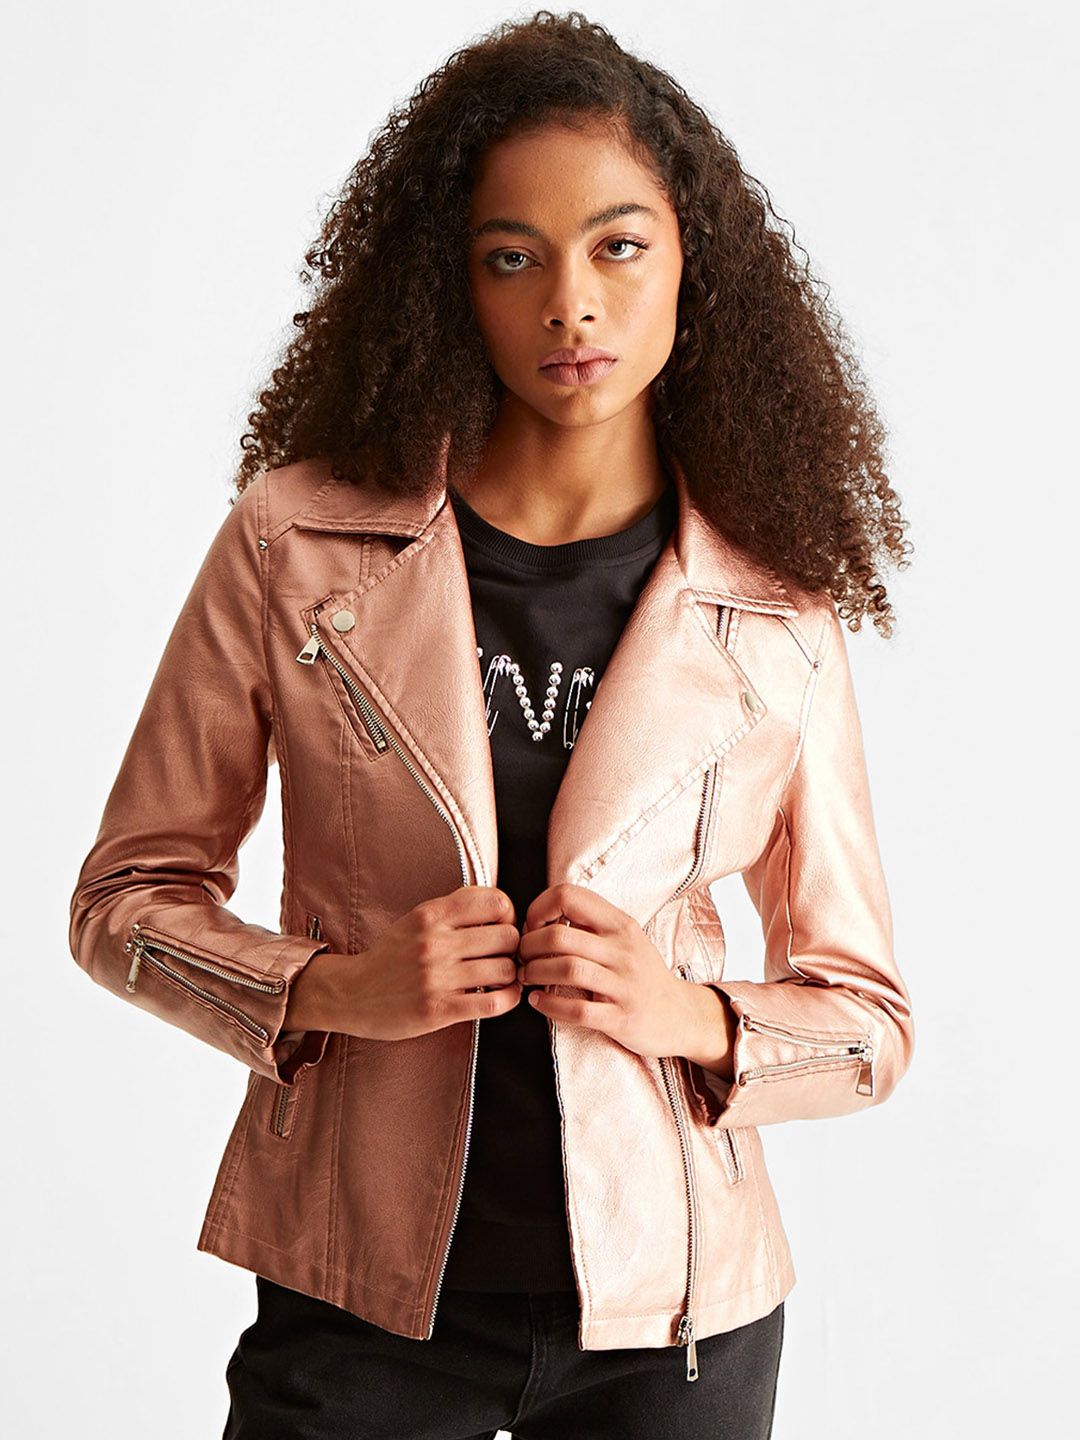 Women cover story jackets - Buy Women cover story jackets online in India